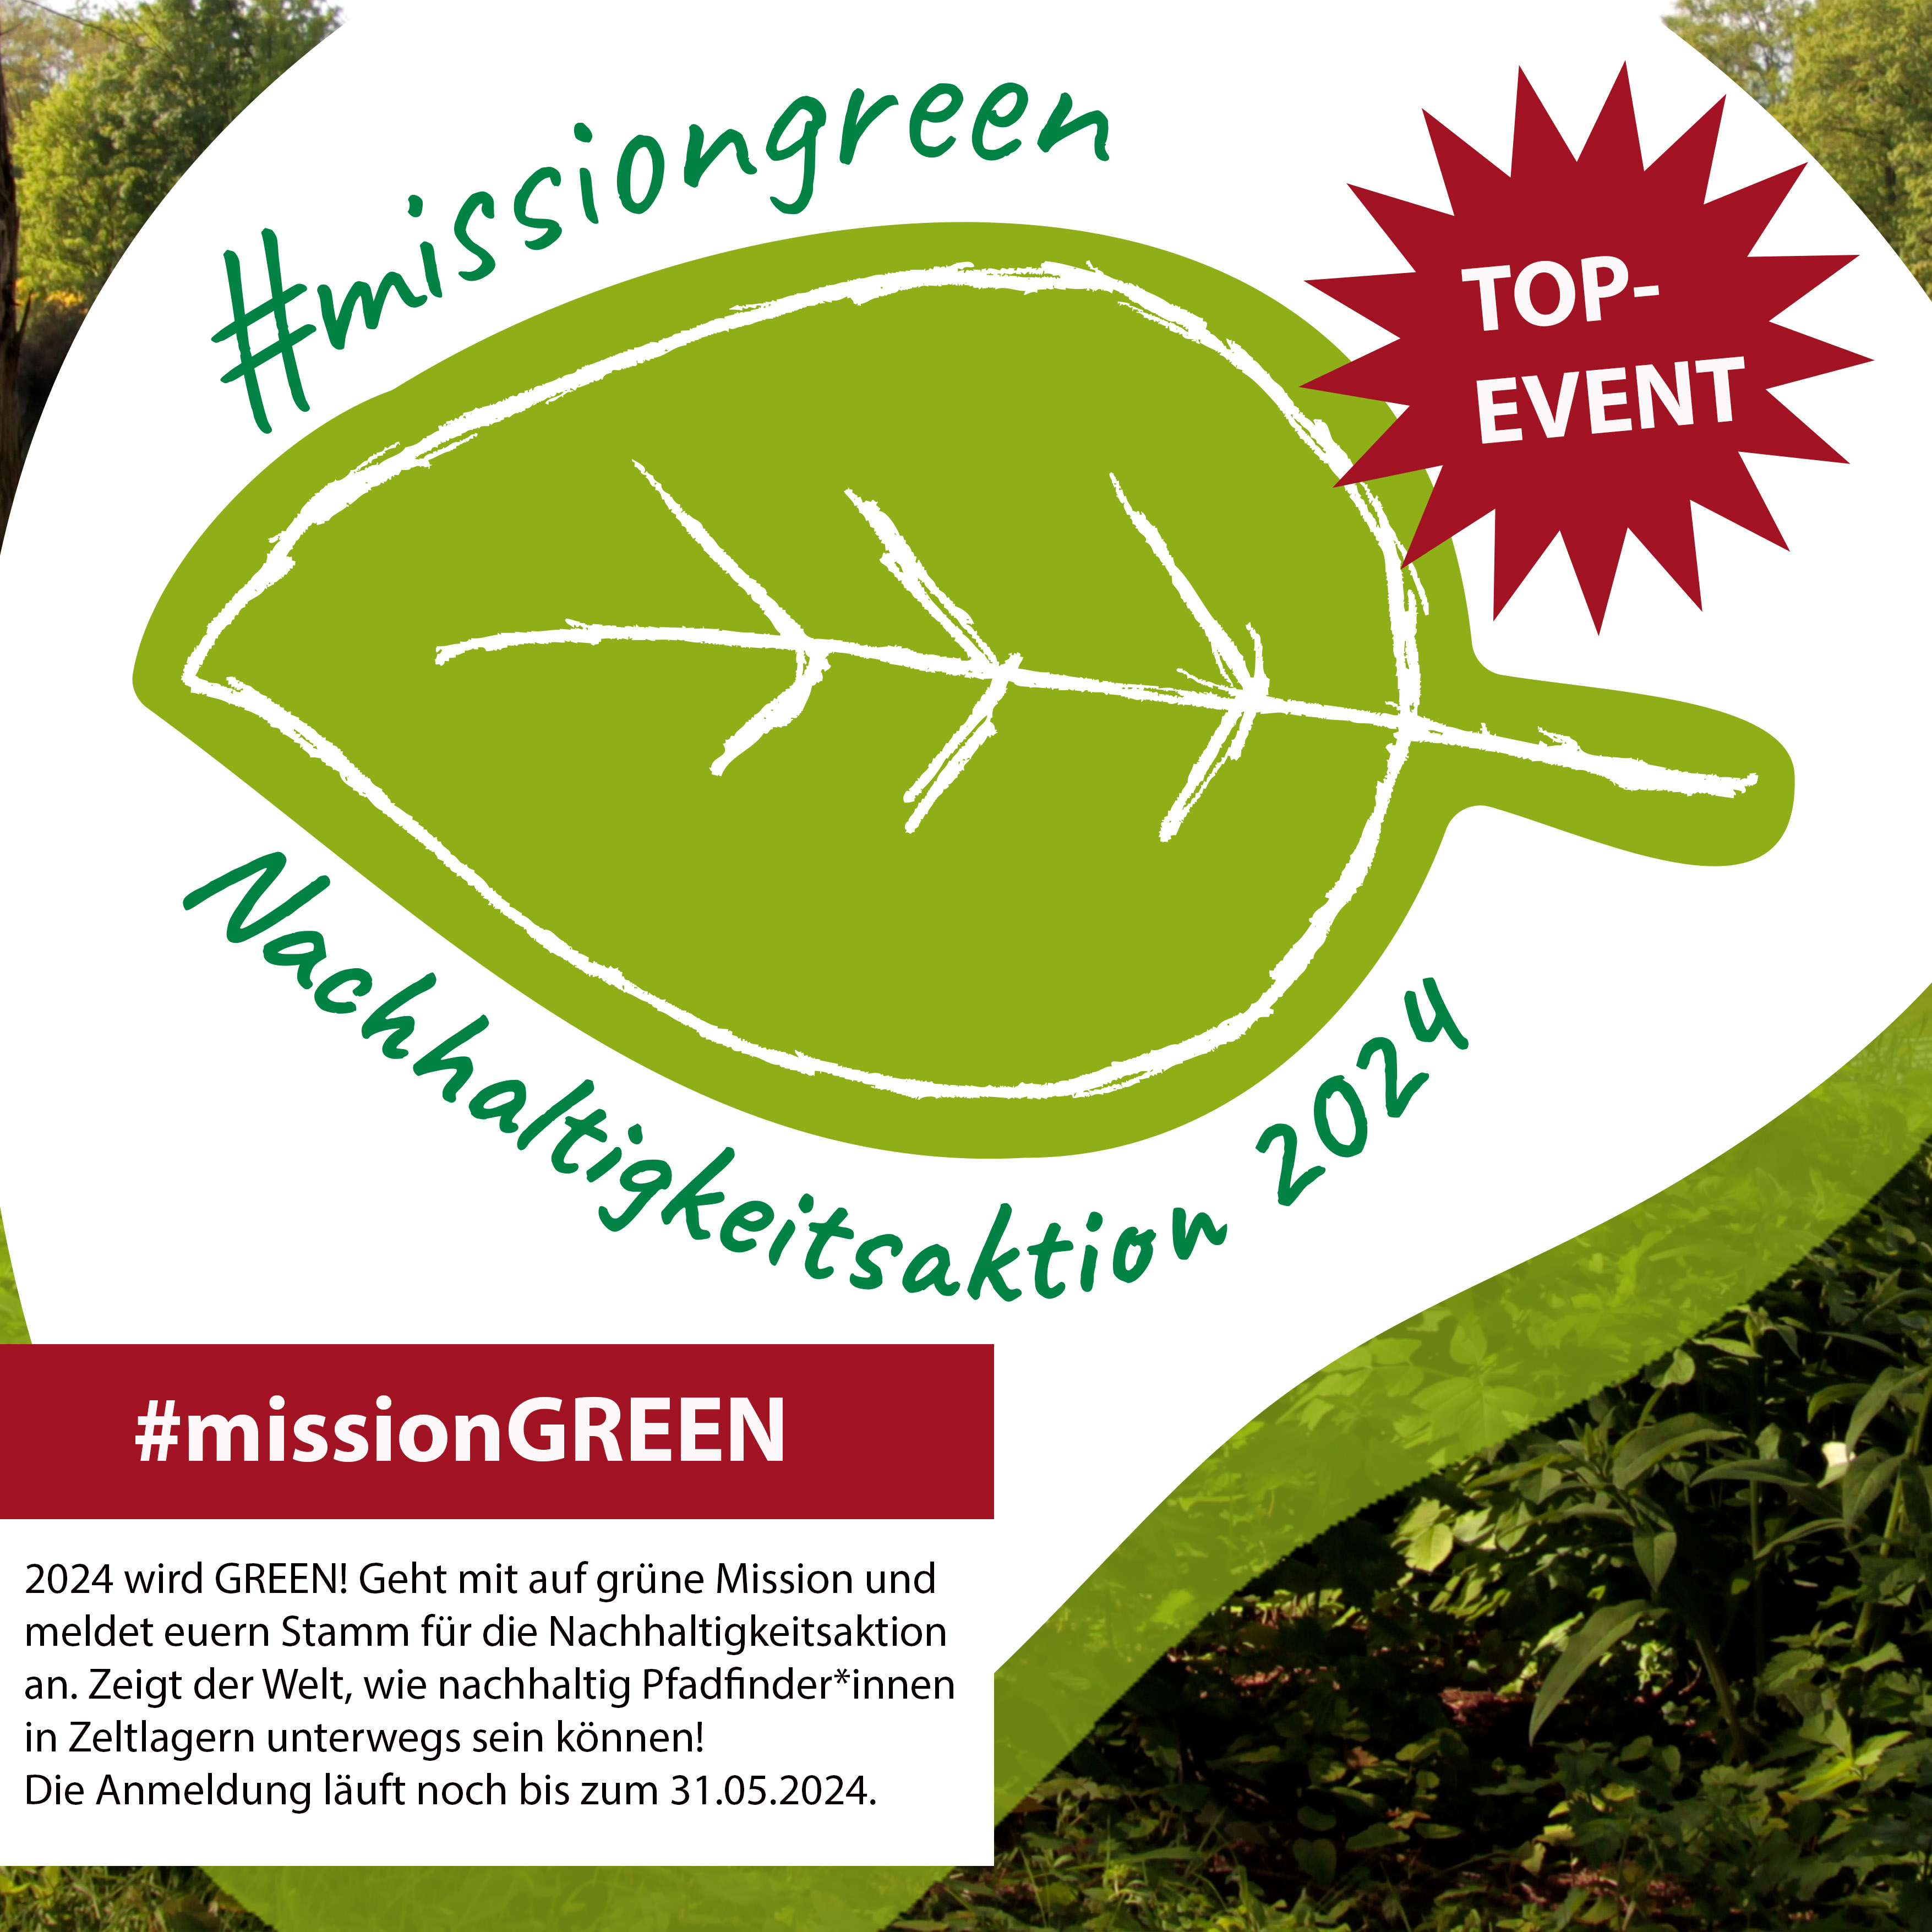 Top-Event_missiongreen_.jpg